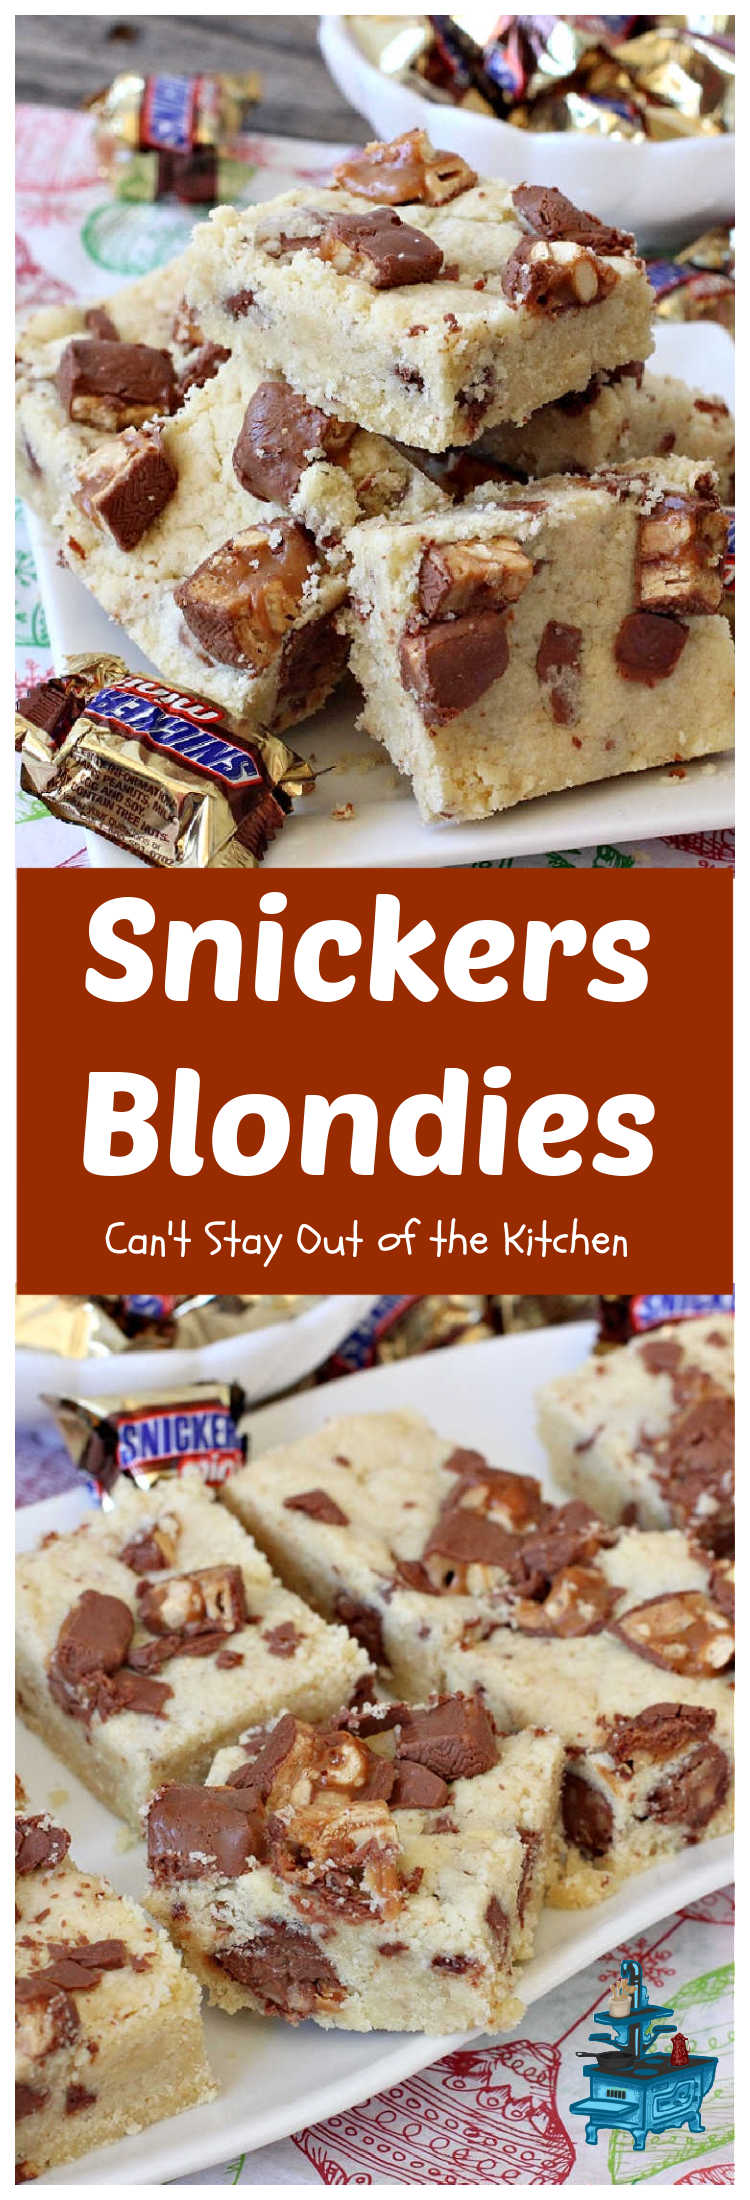 Snickers Blondies | Can't Stay Out of the Kitchen